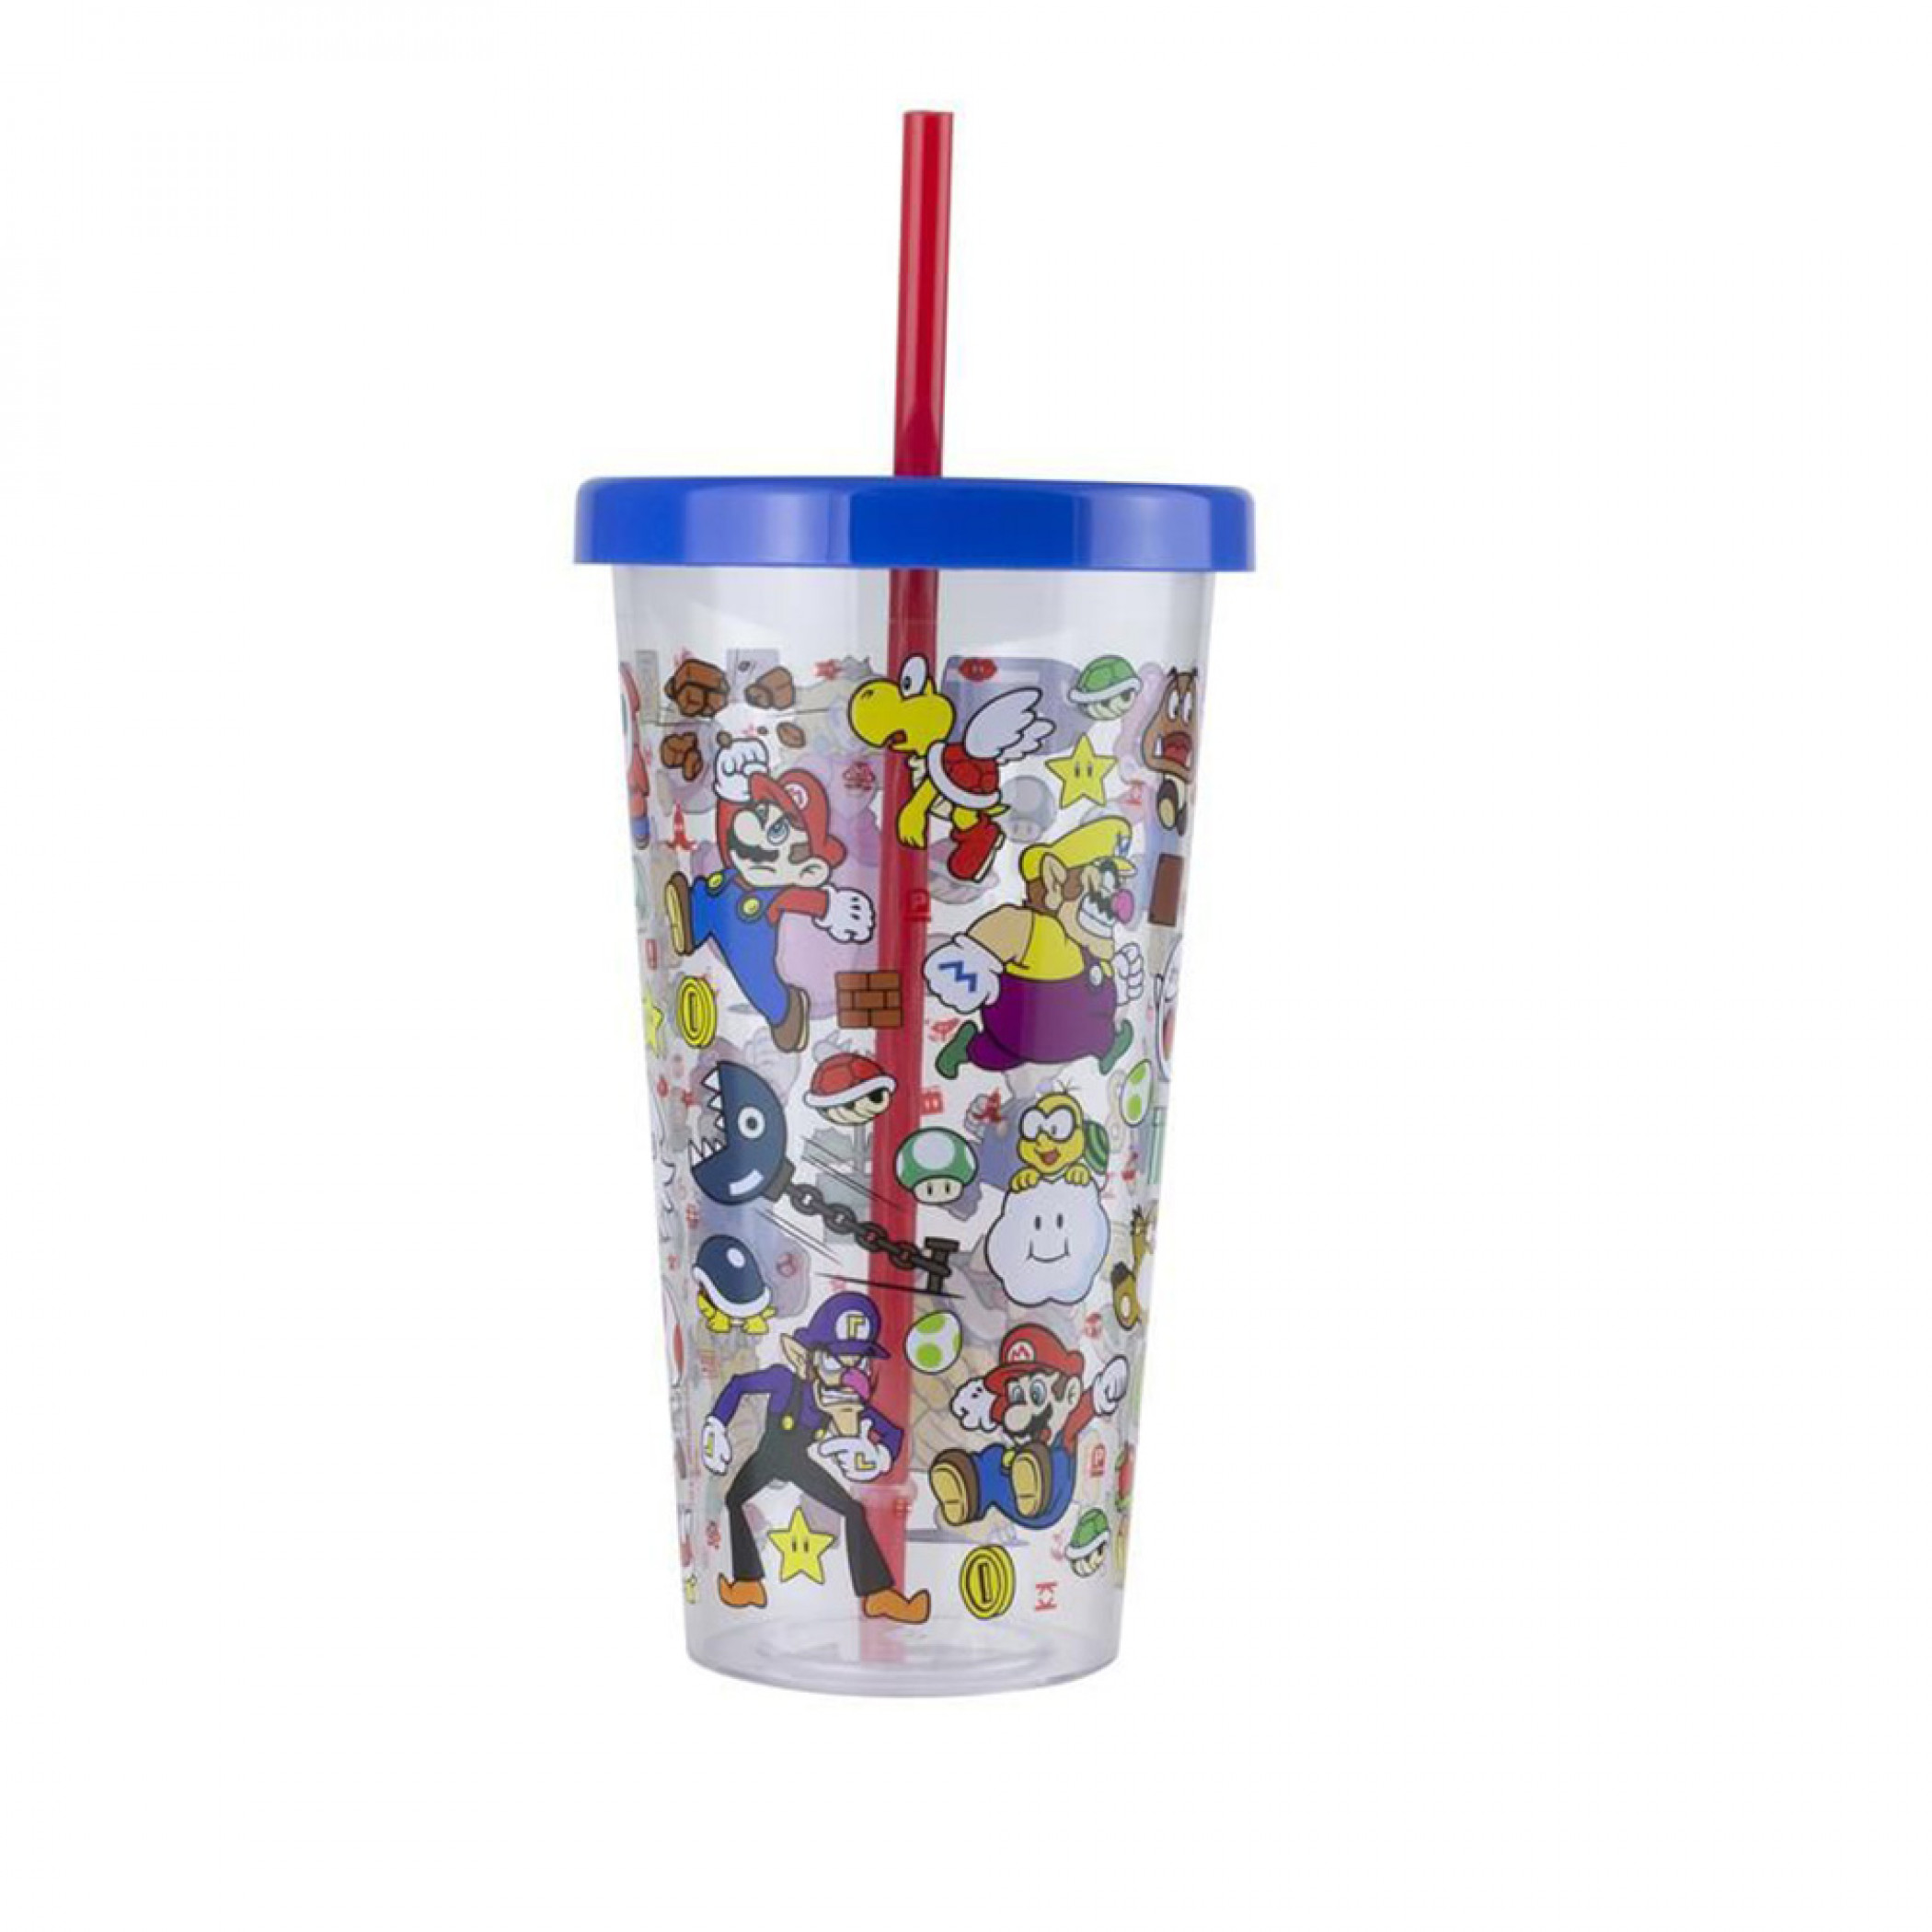 Super Mario Characters and Power-Ups 23oz Cup with Lid and Straw